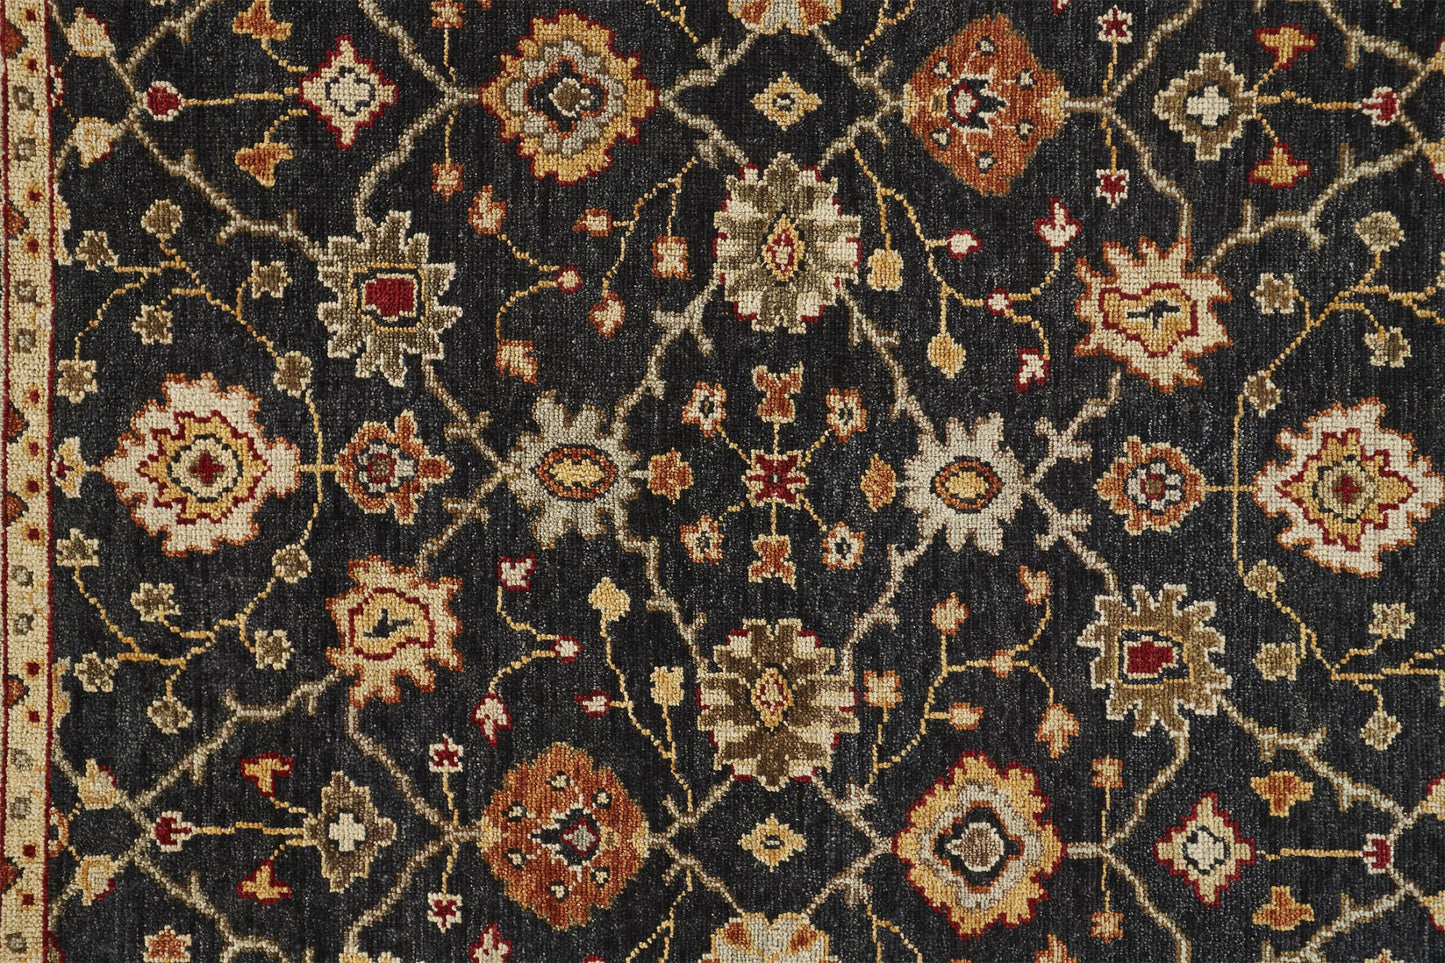 8' X 10' Black Gold And Gray Wool Floral Hand Knotted Stain Resistant Area Rug With Fringe